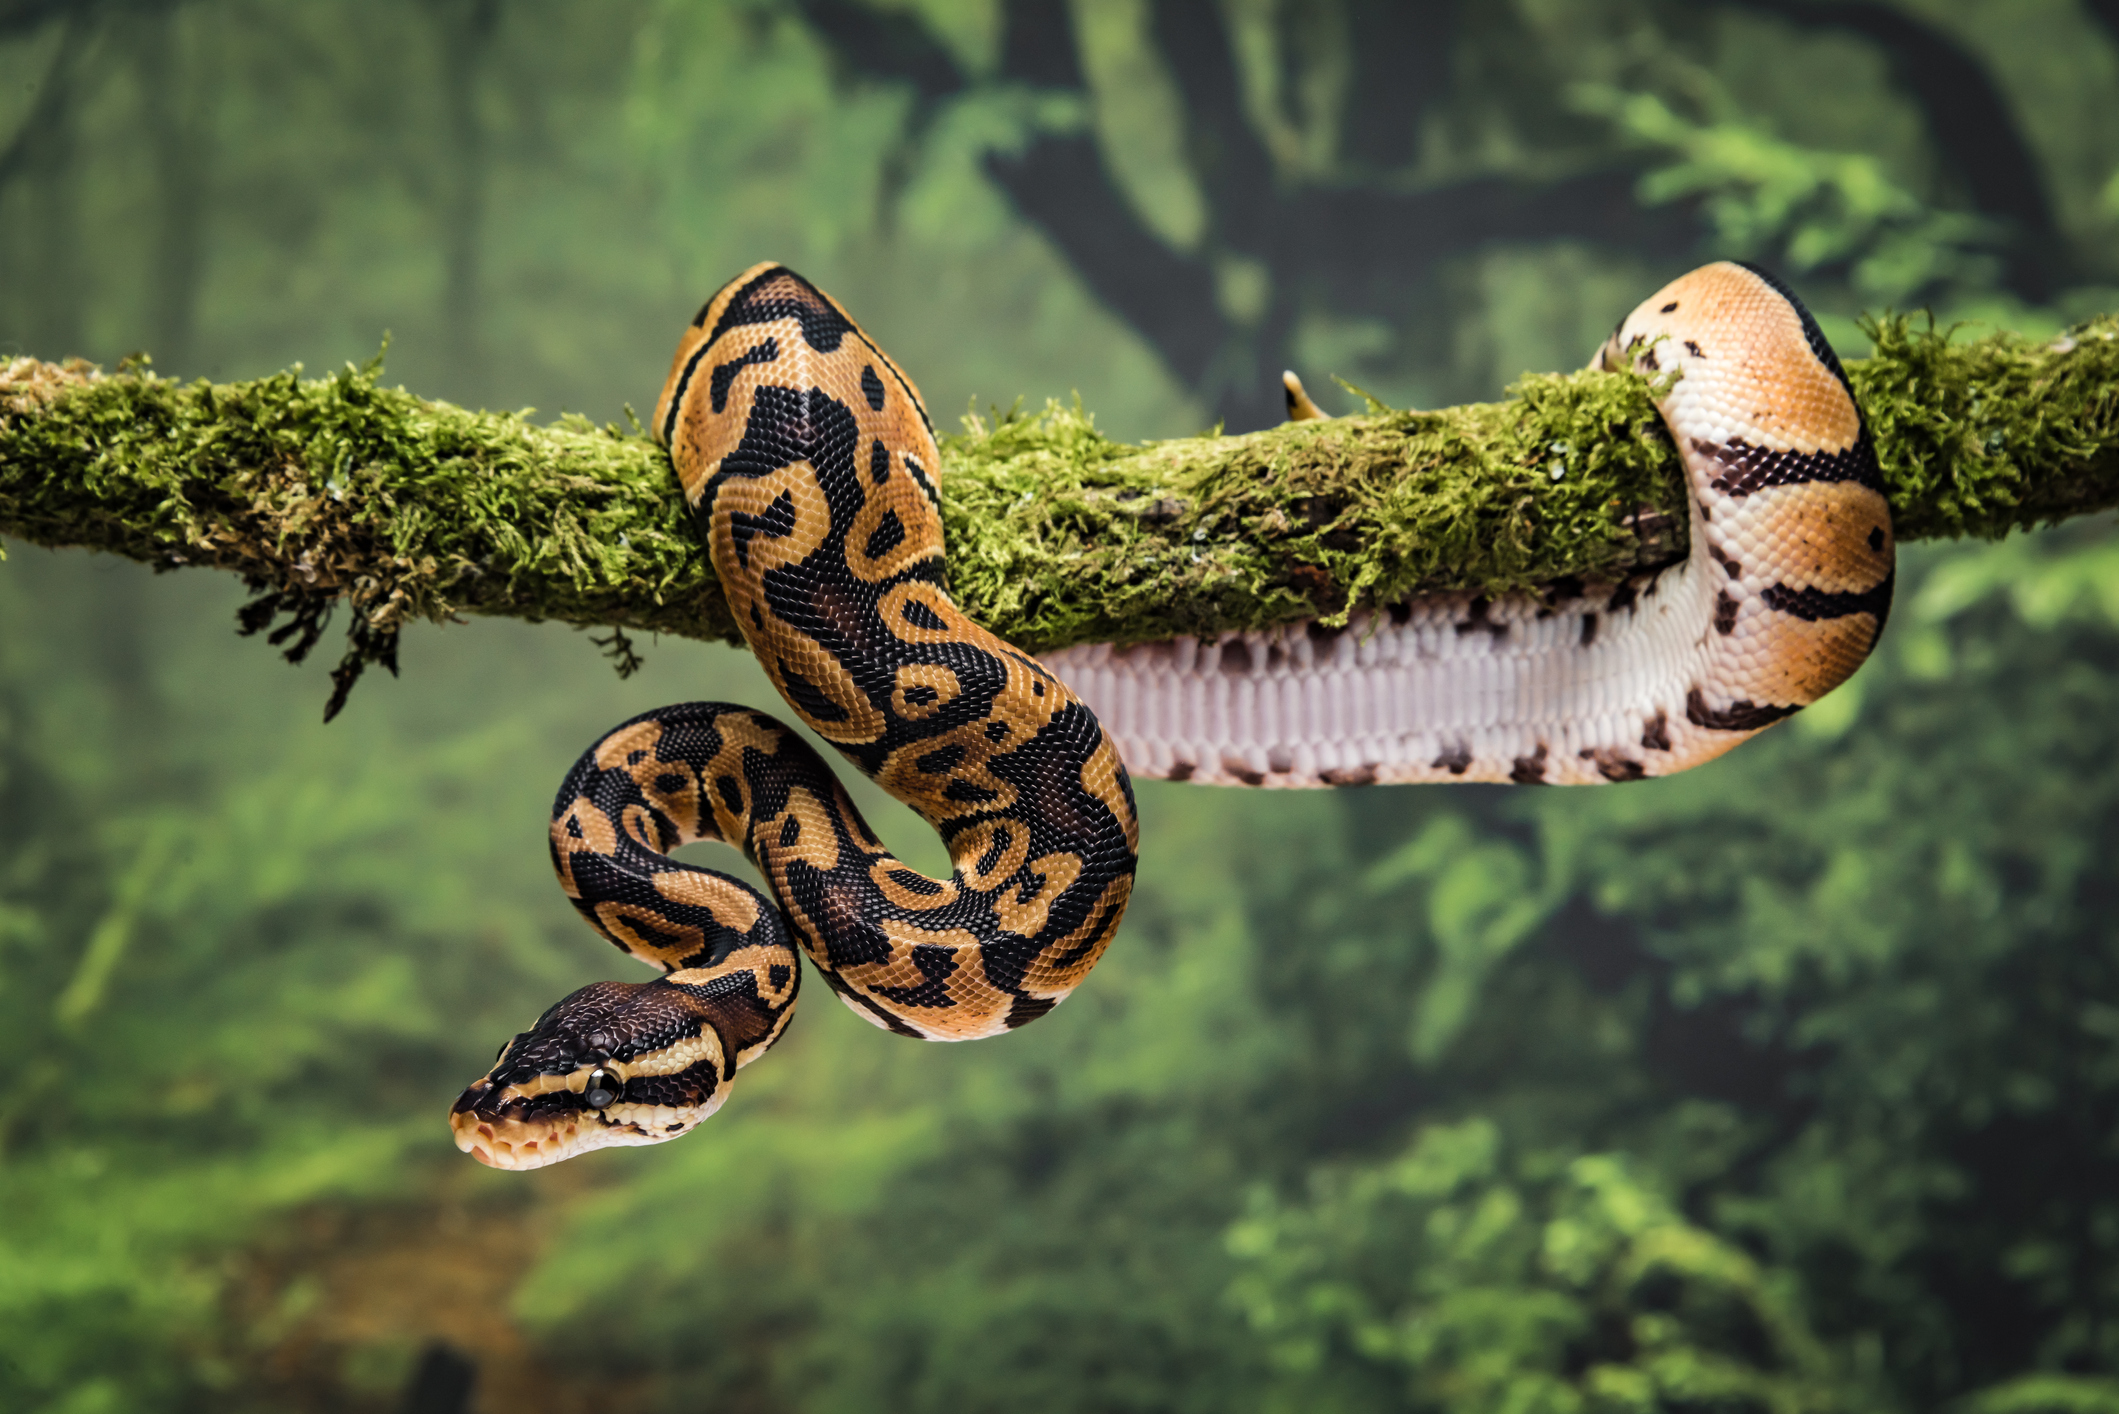 How a mass extinction resulted in the rise of the snakes | Ars Technica